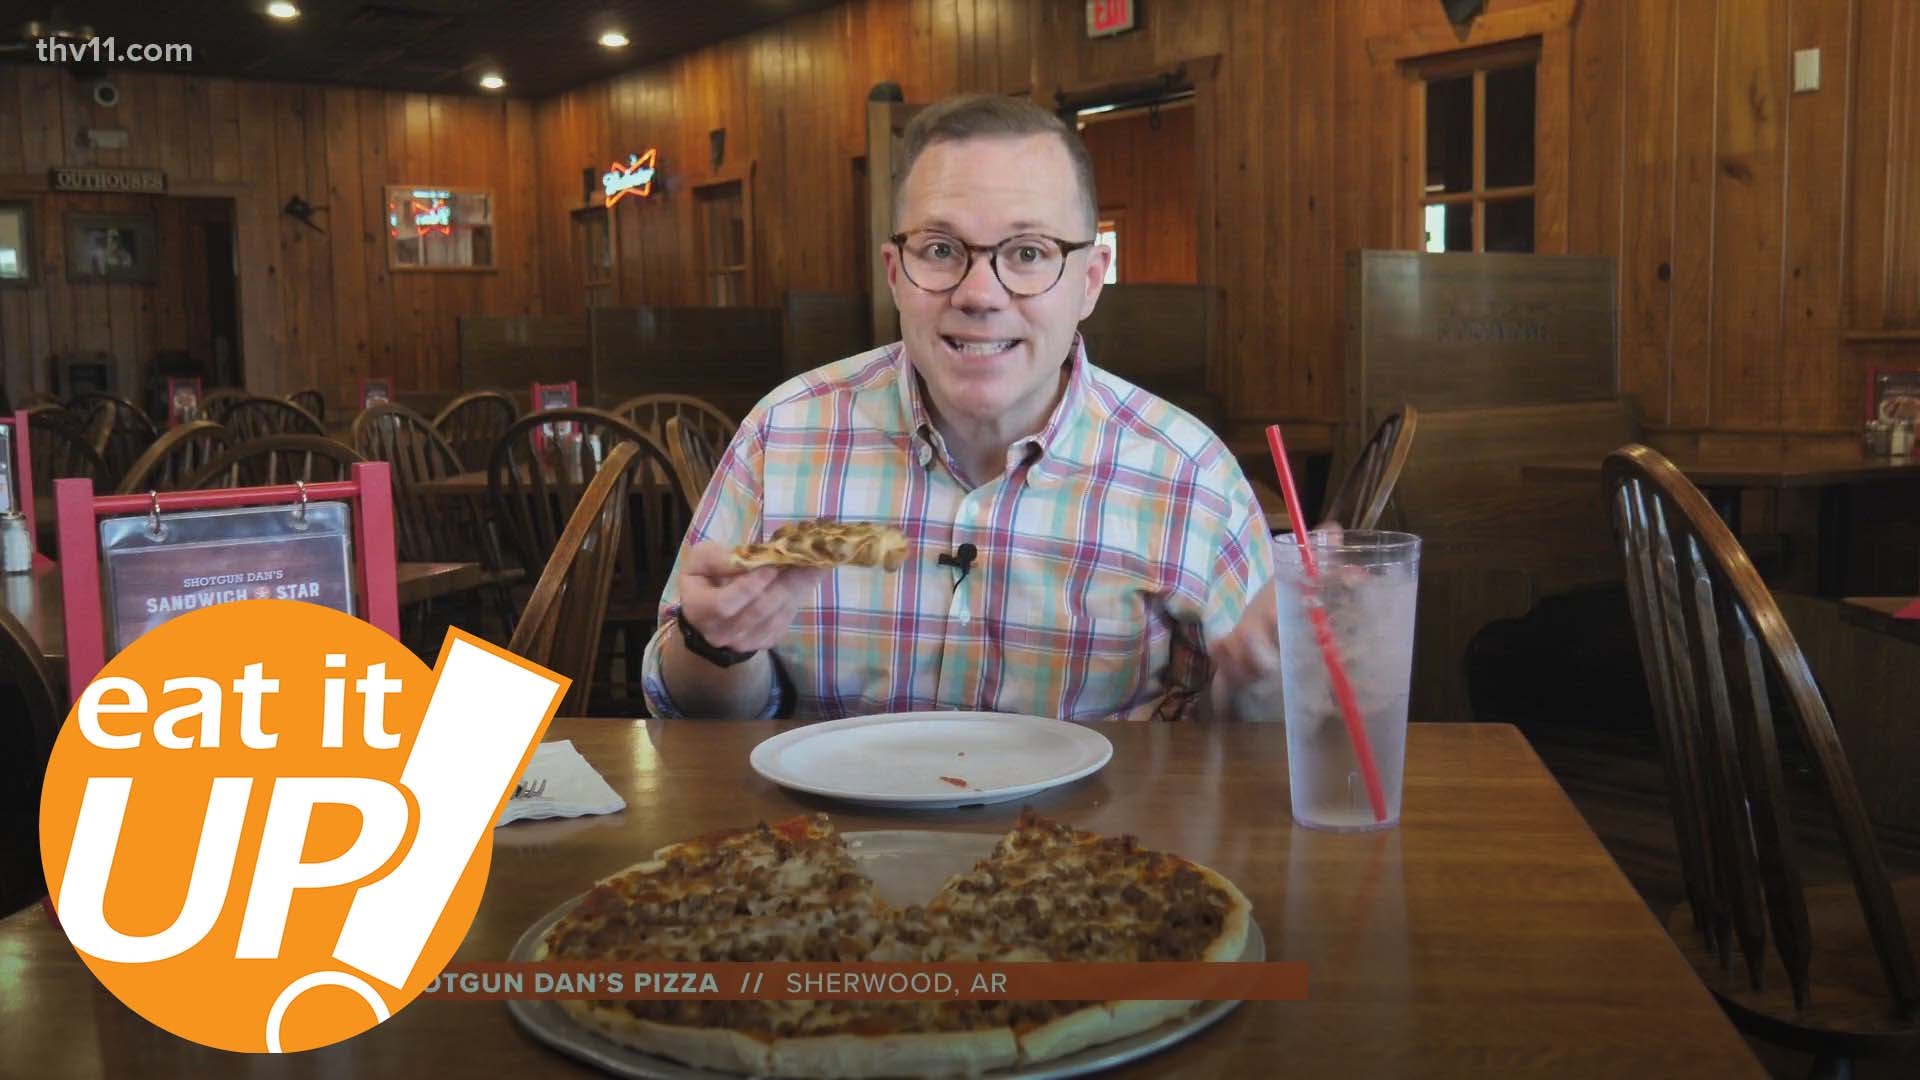 On this week's Eat It Up, Skot Covert visits Shotgun Dan's Pizza, a family-owned restaurant beloved by the Little Rock community & known for their 'no skimpin' motto